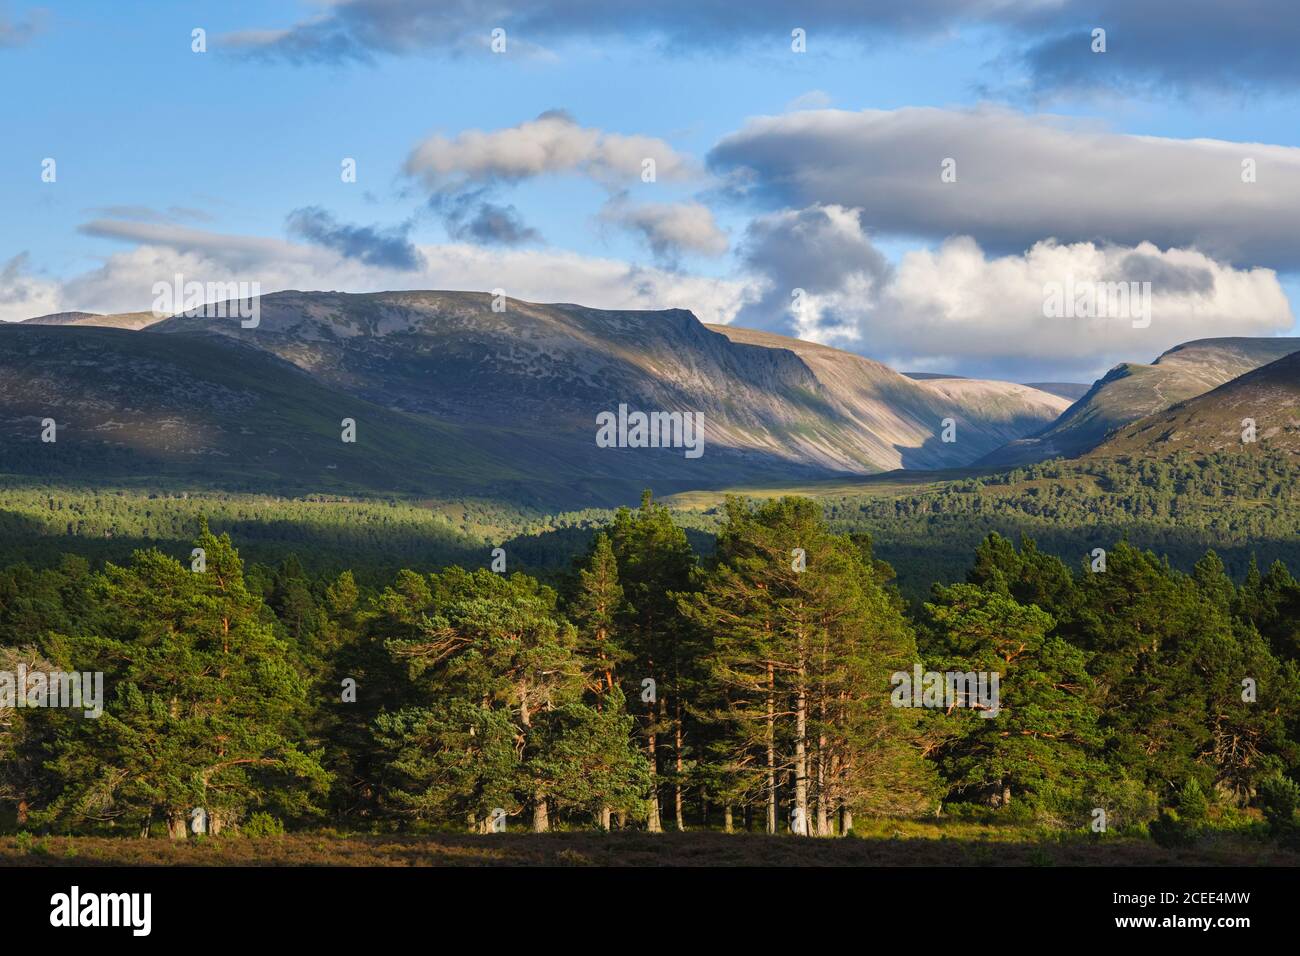 Scotland, Scottish Highlands, Cairngorms National Park. The Caledonian Forest of the Rothiemurchus estate with the Cairngorm Mountain range in the dis Stock Photo